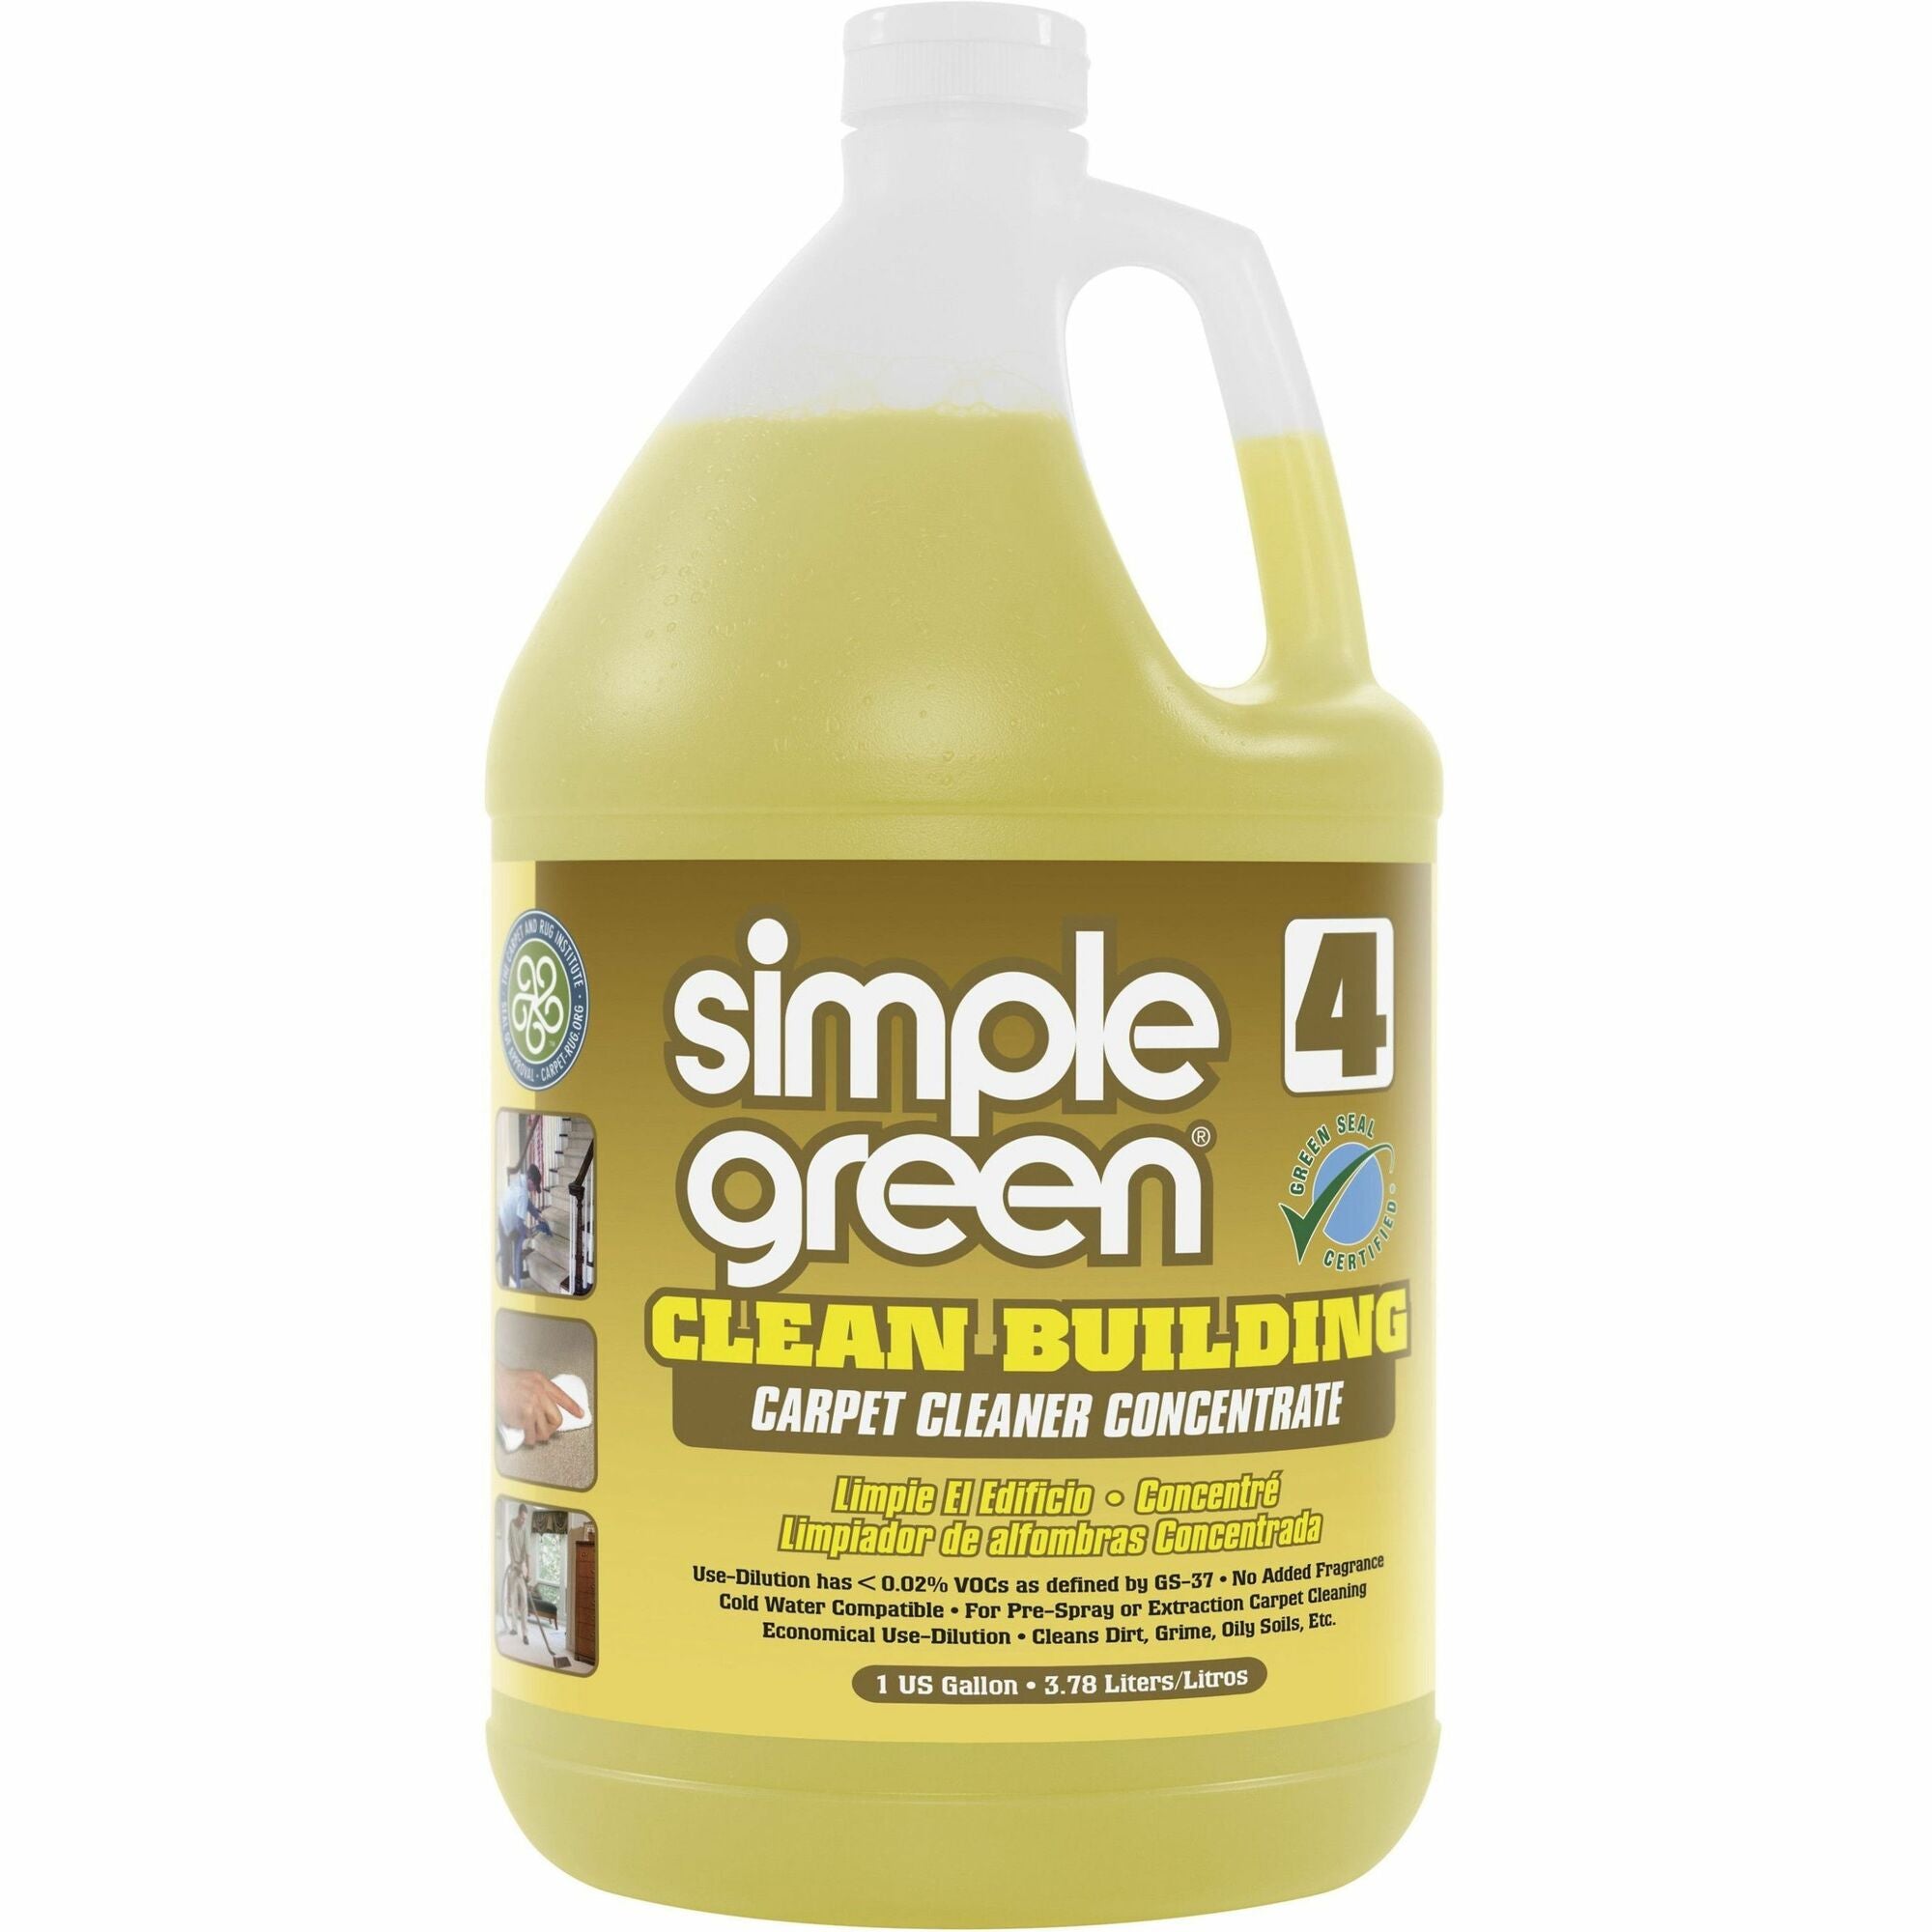 Simple Green Clean Building Carpet Cleaner Concentrate - Concentrate - 128 fl oz (4 quart) - 2 / Carton - Non-toxic, Caustic-free, Organic, Non-flammable, Fragrance-free, Unscented - Sand - 1